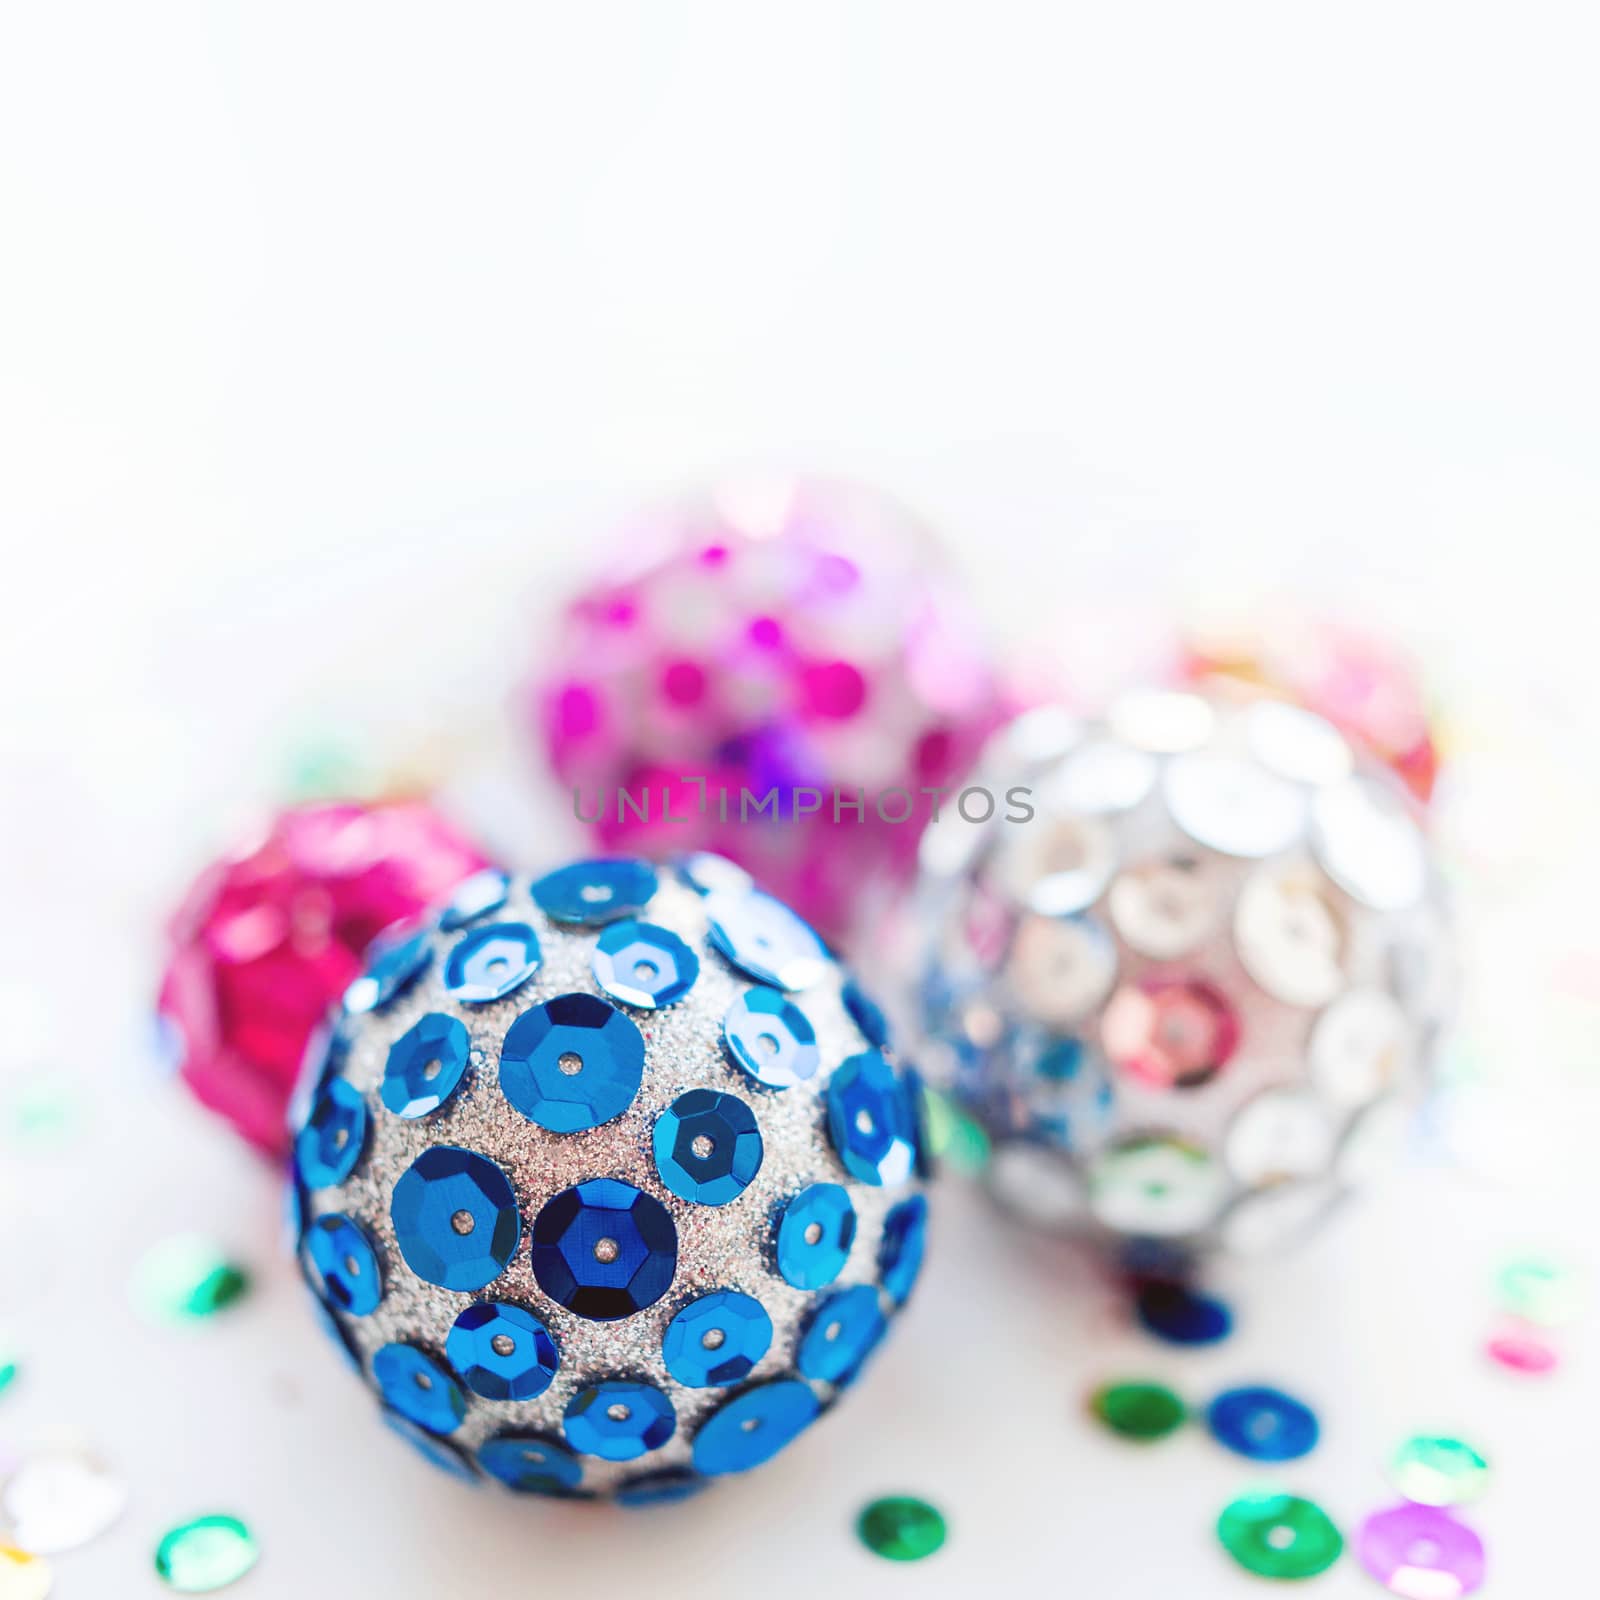 Christmas and New Year background with bright balls. Hand made decorations for Christmas tree with colorful sparkling spangles. Place for text.